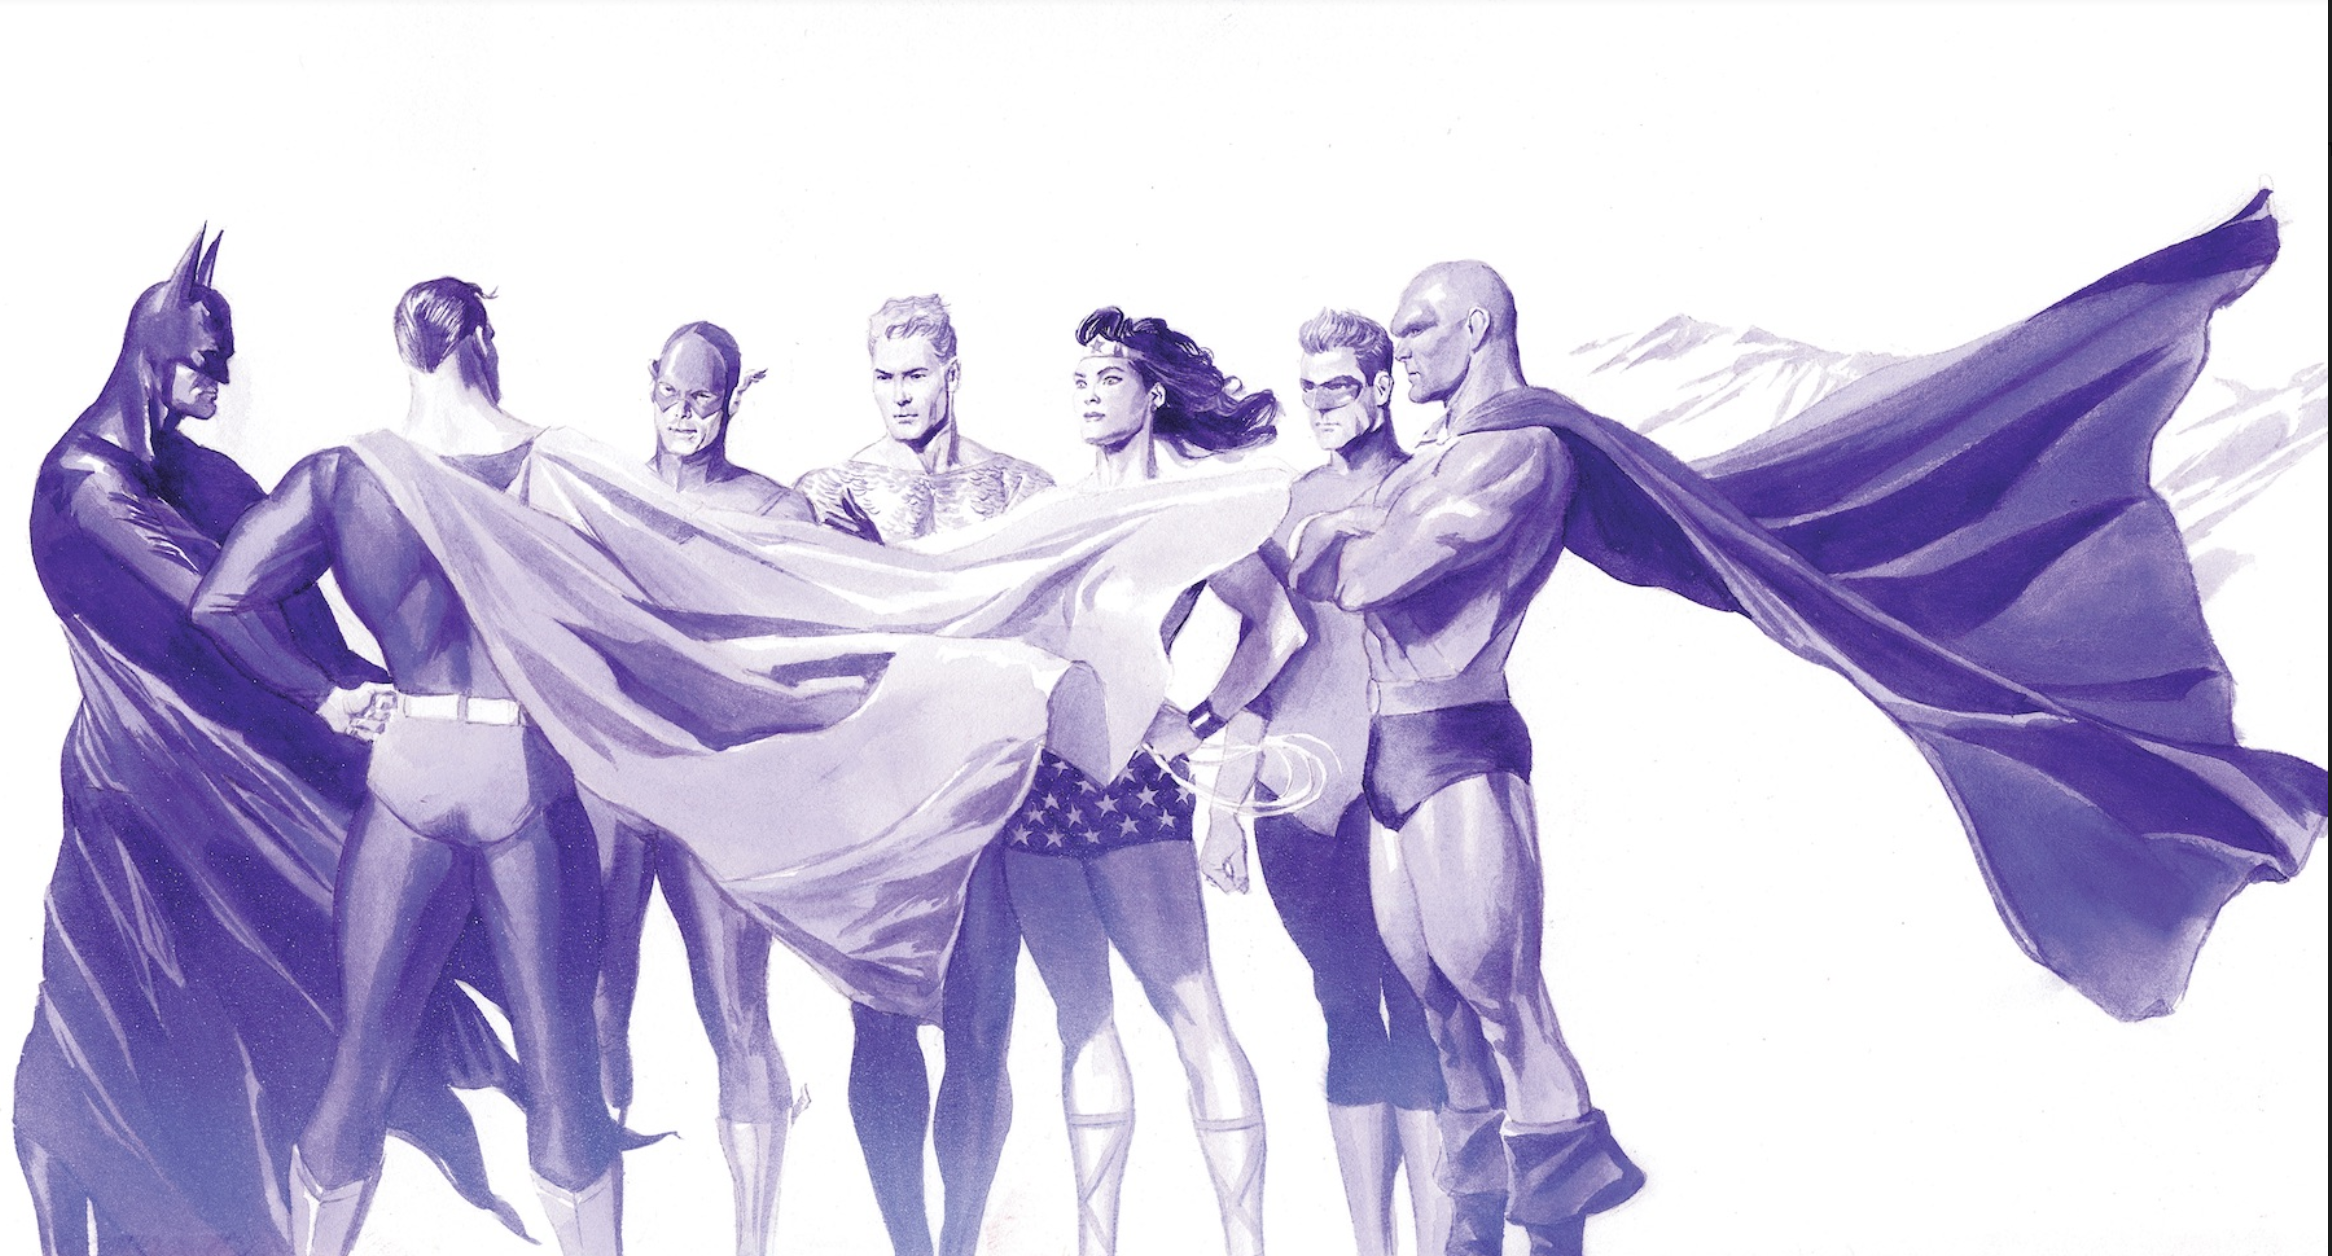 hcvury-Origins__Justice_League_of_America_by_Alex_Ross__2332x1256_-ovreyid7d5651.png